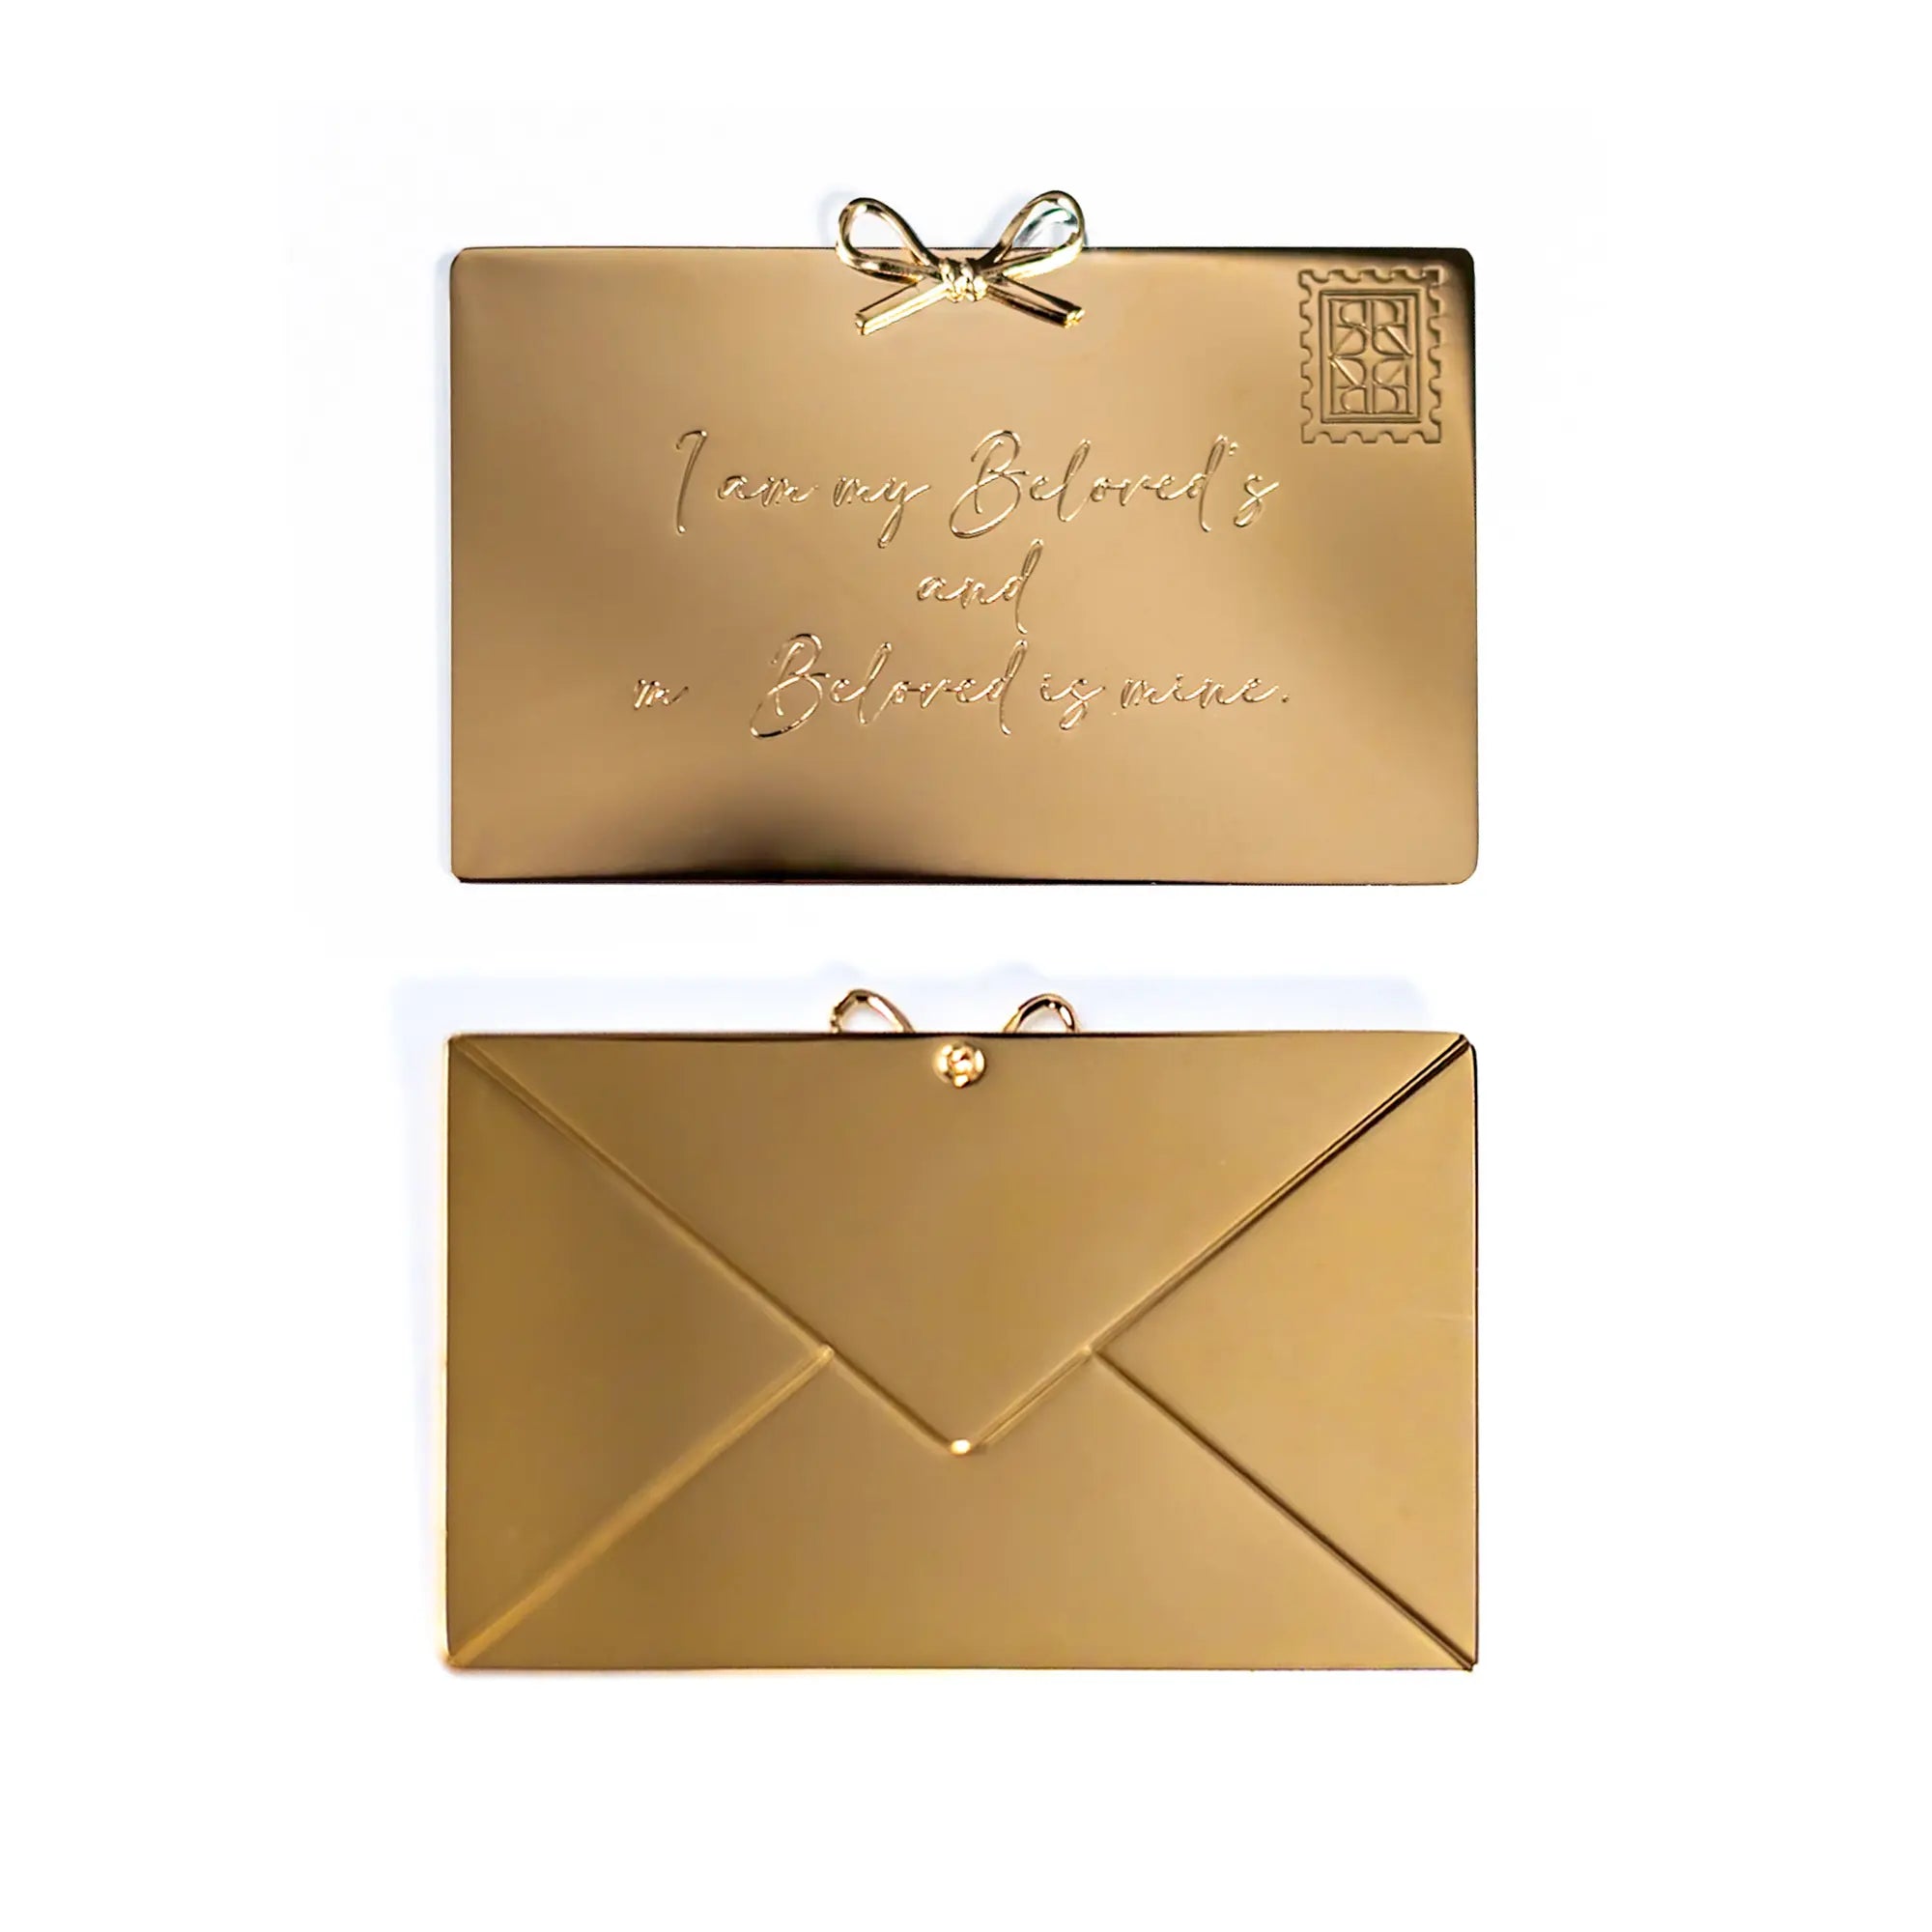 Two golden clutch purses, one with a bow design and embossed text featuring The Bella Rosa Collection personalization, the other with an envelope style design.